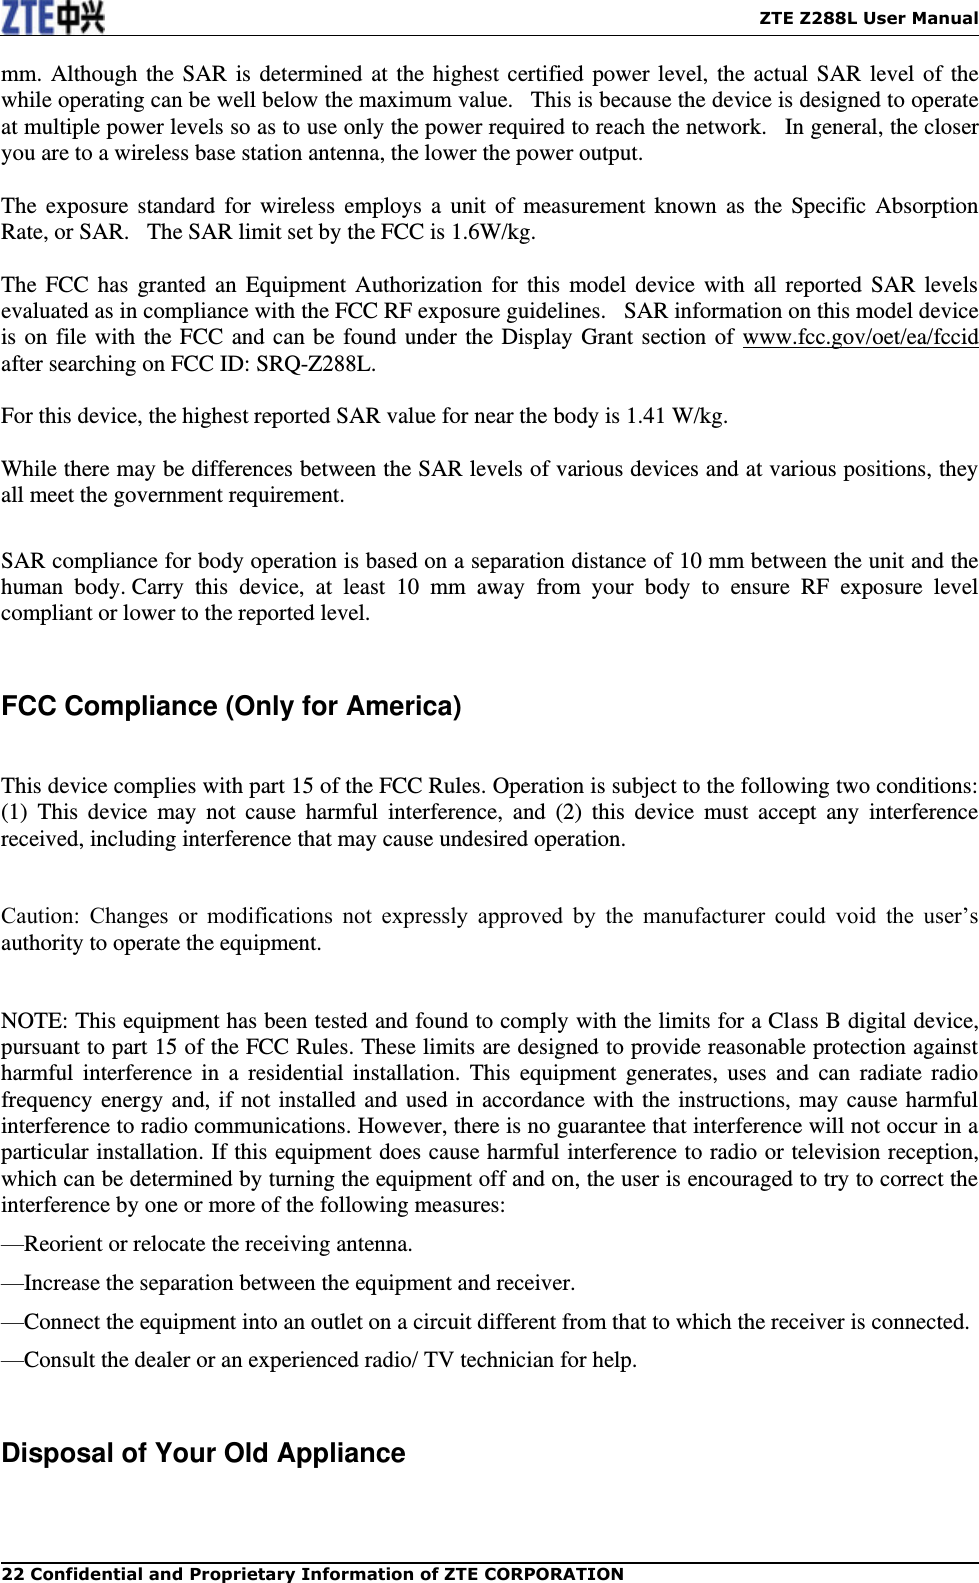    ZTE Z288L User Manual 22 Confidential and Proprietary Information of ZTE CORPORATION mm. Although the SAR is determined at the highest certified power level, the actual SAR level of the while operating can be well below the maximum value.   This is because the device is designed to operate at multiple power levels so as to use only the power required to reach the network.   In general, the closer you are to a wireless base station antenna, the lower the power output.  The  exposure  standard  for  wireless employs  a  unit of measurement known  as the Specific Absorption Rate, or SAR.   The SAR limit set by the FCC is 1.6W/kg.     The FCC  has  granted  an Equipment Authorization  for this  model  device with  all  reported  SAR levels evaluated as in compliance with the FCC RF exposure guidelines.   SAR information on this model device is on file with the FCC and can be found under the Display Grant section of www.fcc.gov/oet/ea/fccid after searching on FCC ID: SRQ-Z288L.  For this device, the highest reported SAR value for near the body is 1.41 W/kg.  While there may be differences between the SAR levels of various devices and at various positions, they all meet the government requirement.  SAR compliance for body operation is based on a separation distance of 10 mm between the unit and the human  body. Carry  this  device,  at  least  10  mm  away  from  your  body  to  ensure  RF  exposure  level compliant or lower to the reported level.    FCC Compliance (Only for America)    This device complies with part 15 of the FCC Rules. Operation is subject to the following two conditions: (1)  This  device  may  not  cause  harmful  interference,  and  (2)  this  device  must  accept  any  interference received, including interference that may cause undesired operation.    Caution:  Changes  or  modifications  not  expressly  approved  by  the  manufacturer  could  void  the  user’s authority to operate the equipment.    NOTE: This equipment has been tested and found to comply with the limits for a Class B digital device, pursuant to part 15 of the FCC Rules. These limits are designed to provide reasonable protection against harmful  interference  in  a residential  installation.  This  equipment  generates,  uses and  can radiate  radio frequency energy and, if not installed and used in accordance with the instructions, may cause harmful interference to radio communications. However, there is no guarantee that interference will not occur in a particular installation. If this equipment does cause harmful interference to radio or television reception, which can be determined by turning the equipment off and on, the user is encouraged to try to correct the interference by one or more of the following measures: —Reorient or relocate the receiving antenna. —Increase the separation between the equipment and receiver. —Connect the equipment into an outlet on a circuit different from that to which the receiver is connected. —Consult the dealer or an experienced radio/ TV technician for help.  Disposal of Your Old Appliance  